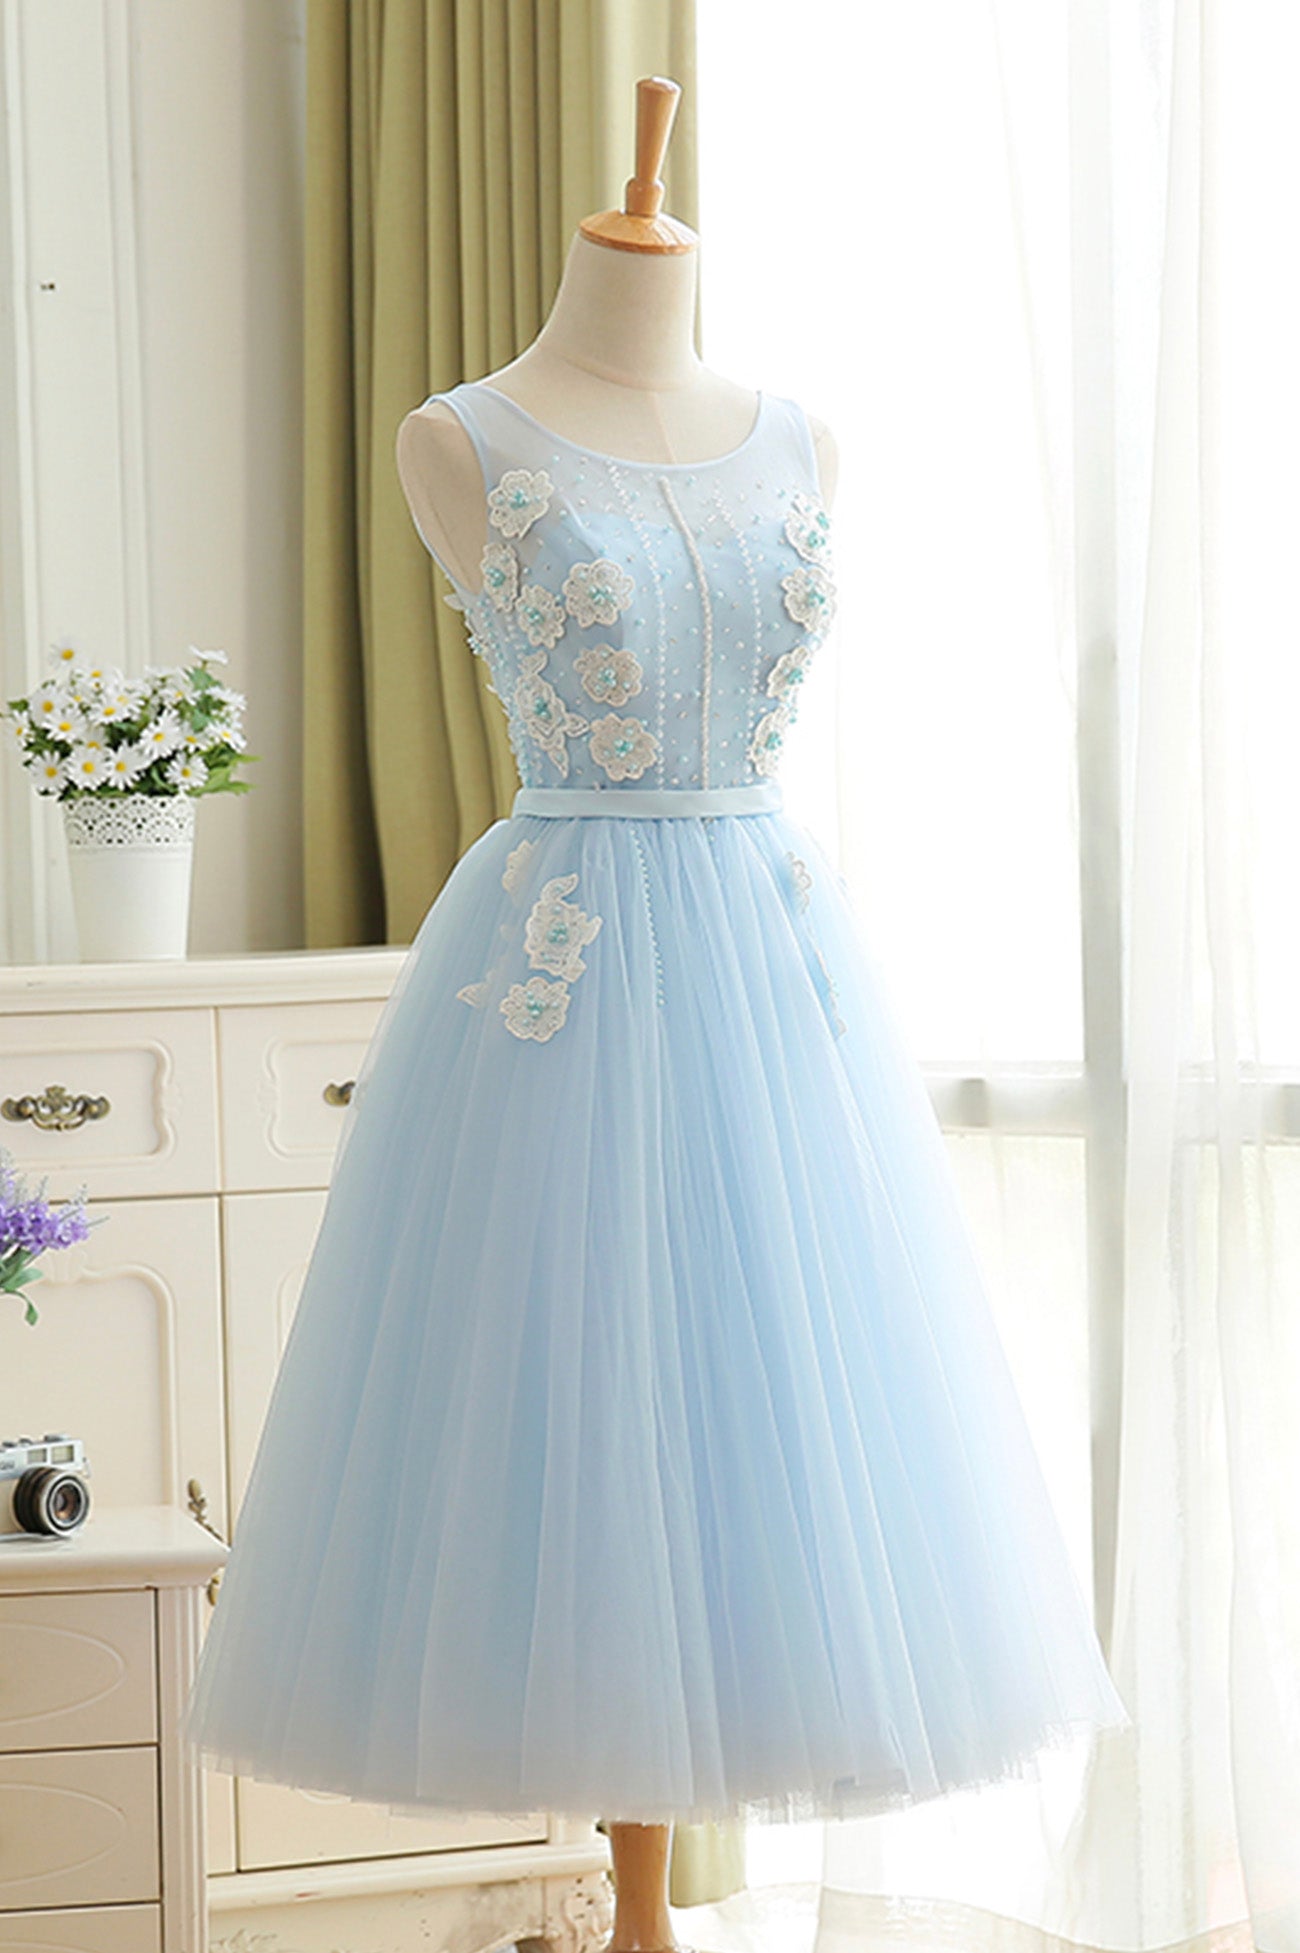 Dream Wedding, Blue Tulle Lace Short Prom Dress, A-Line Homecoming Party Dress